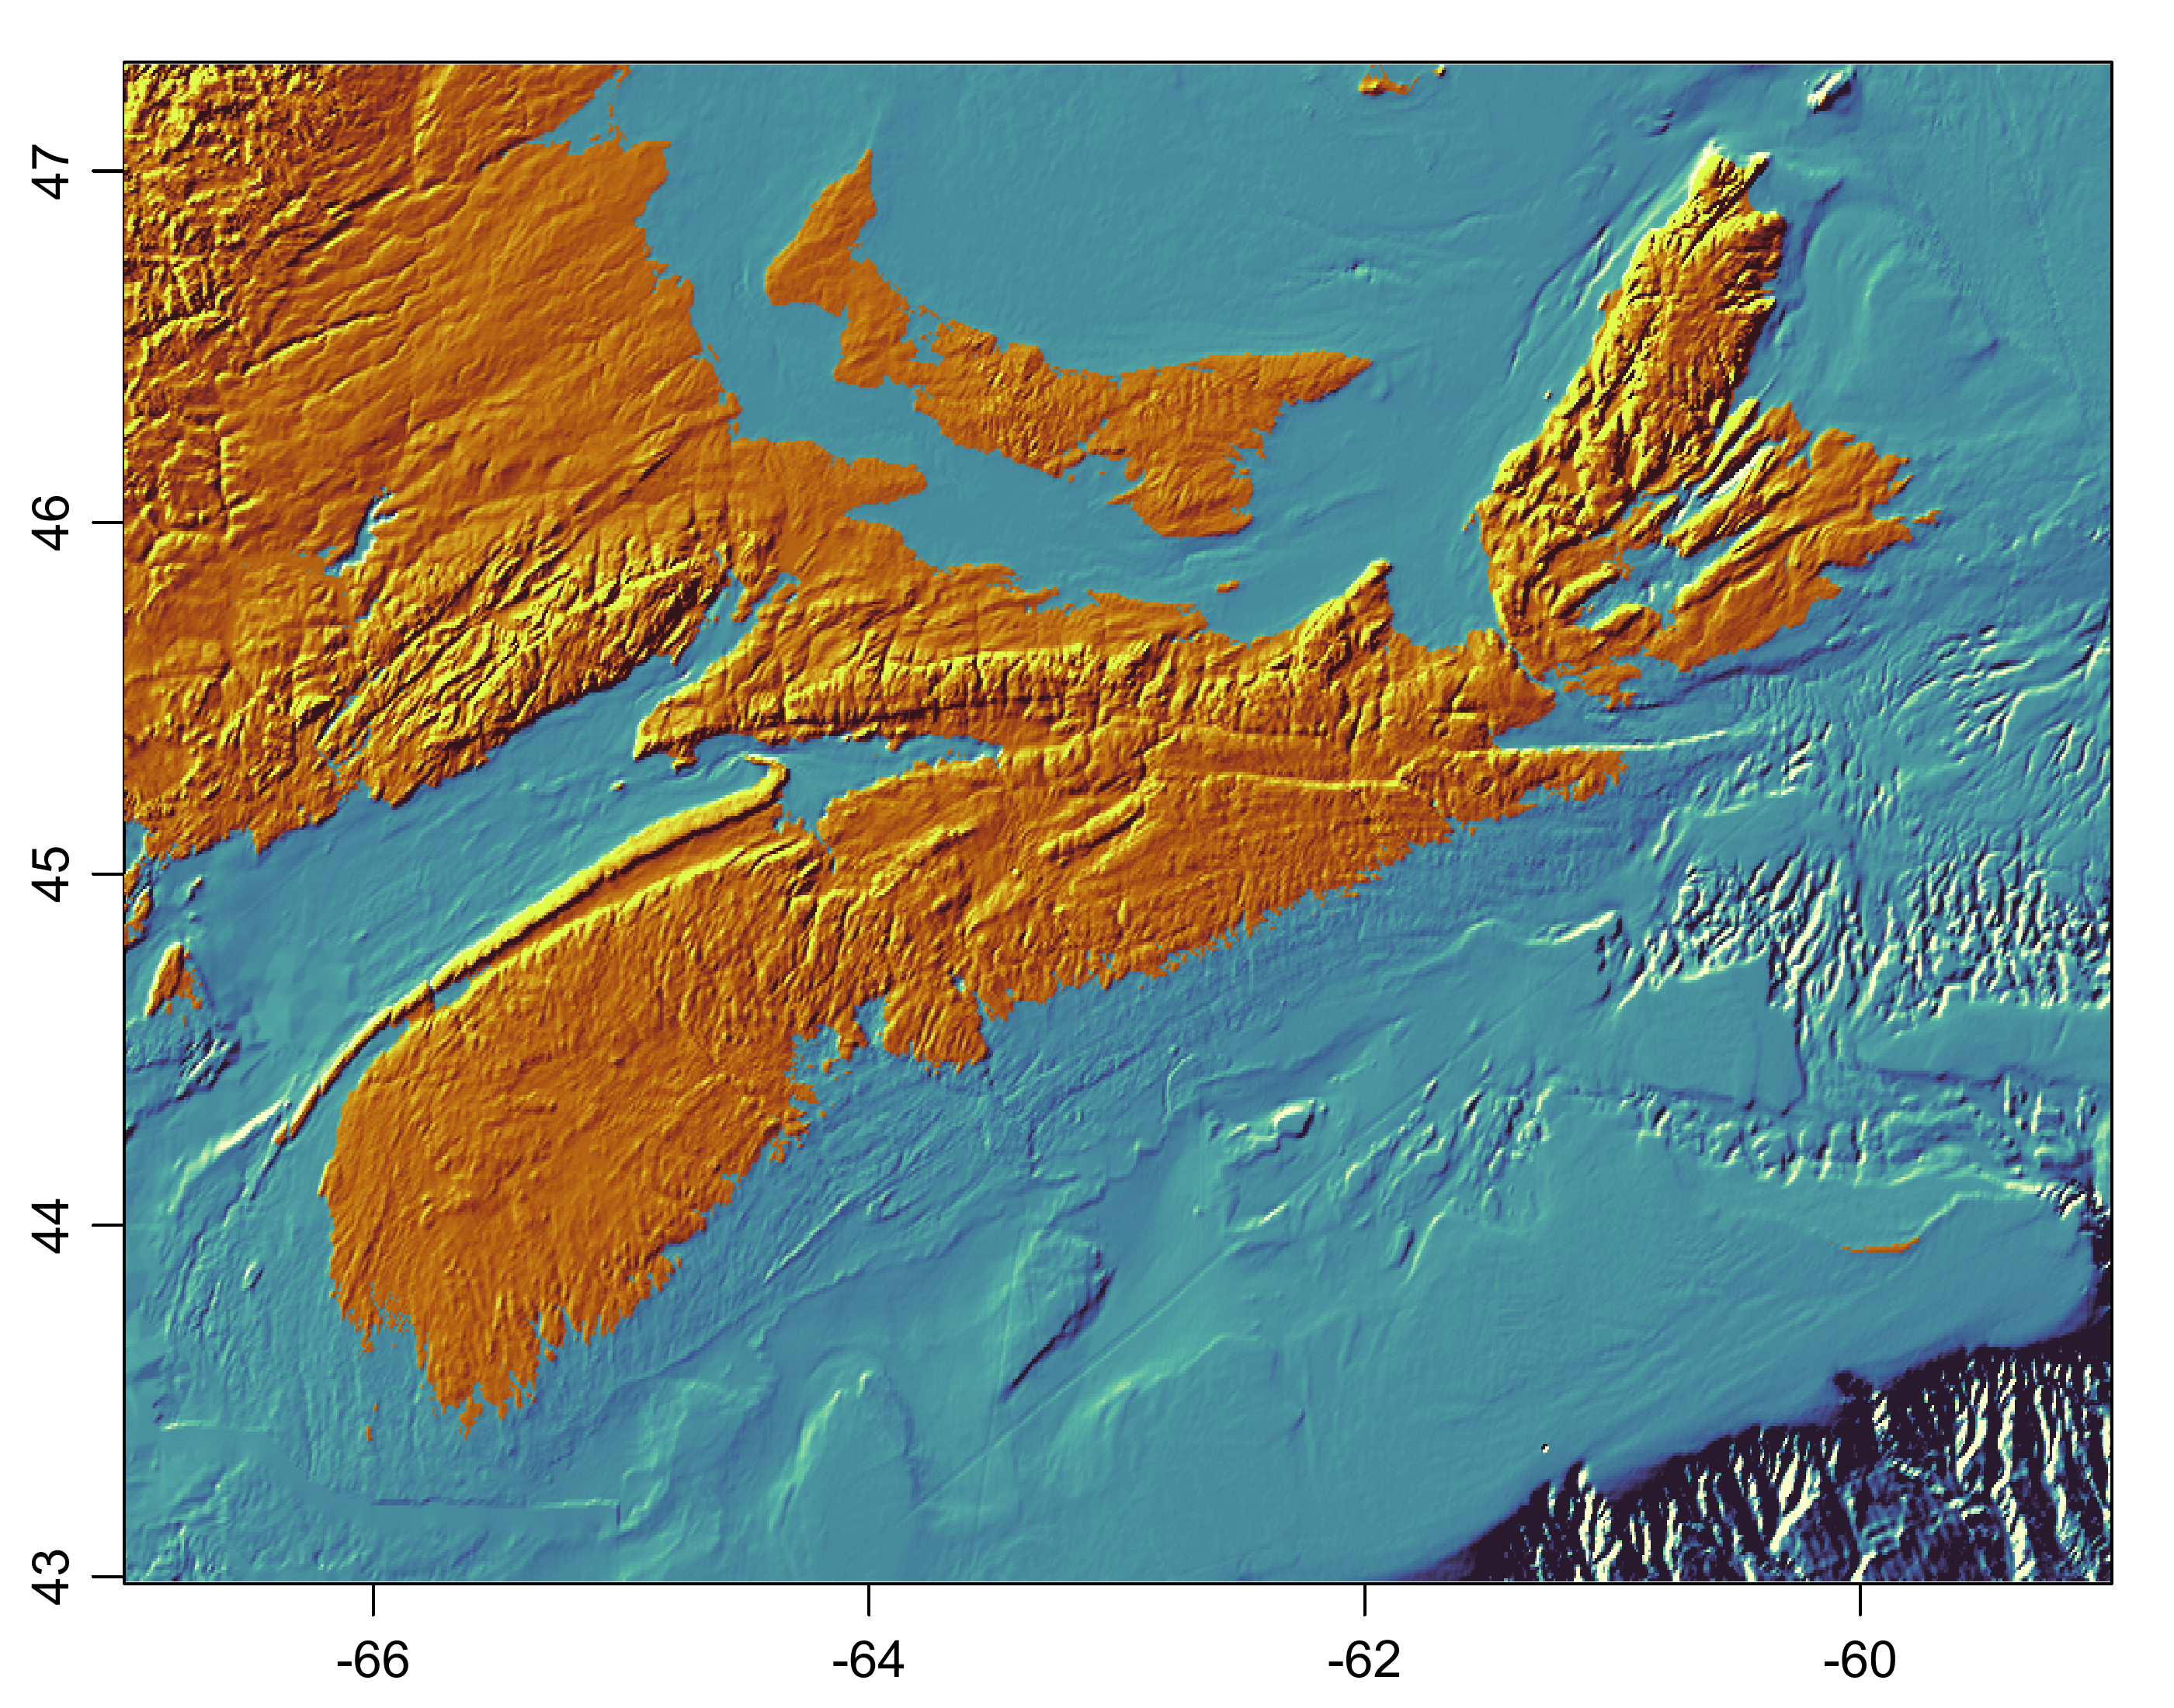 Bathymetry and topography in the region of Nova Scotia.